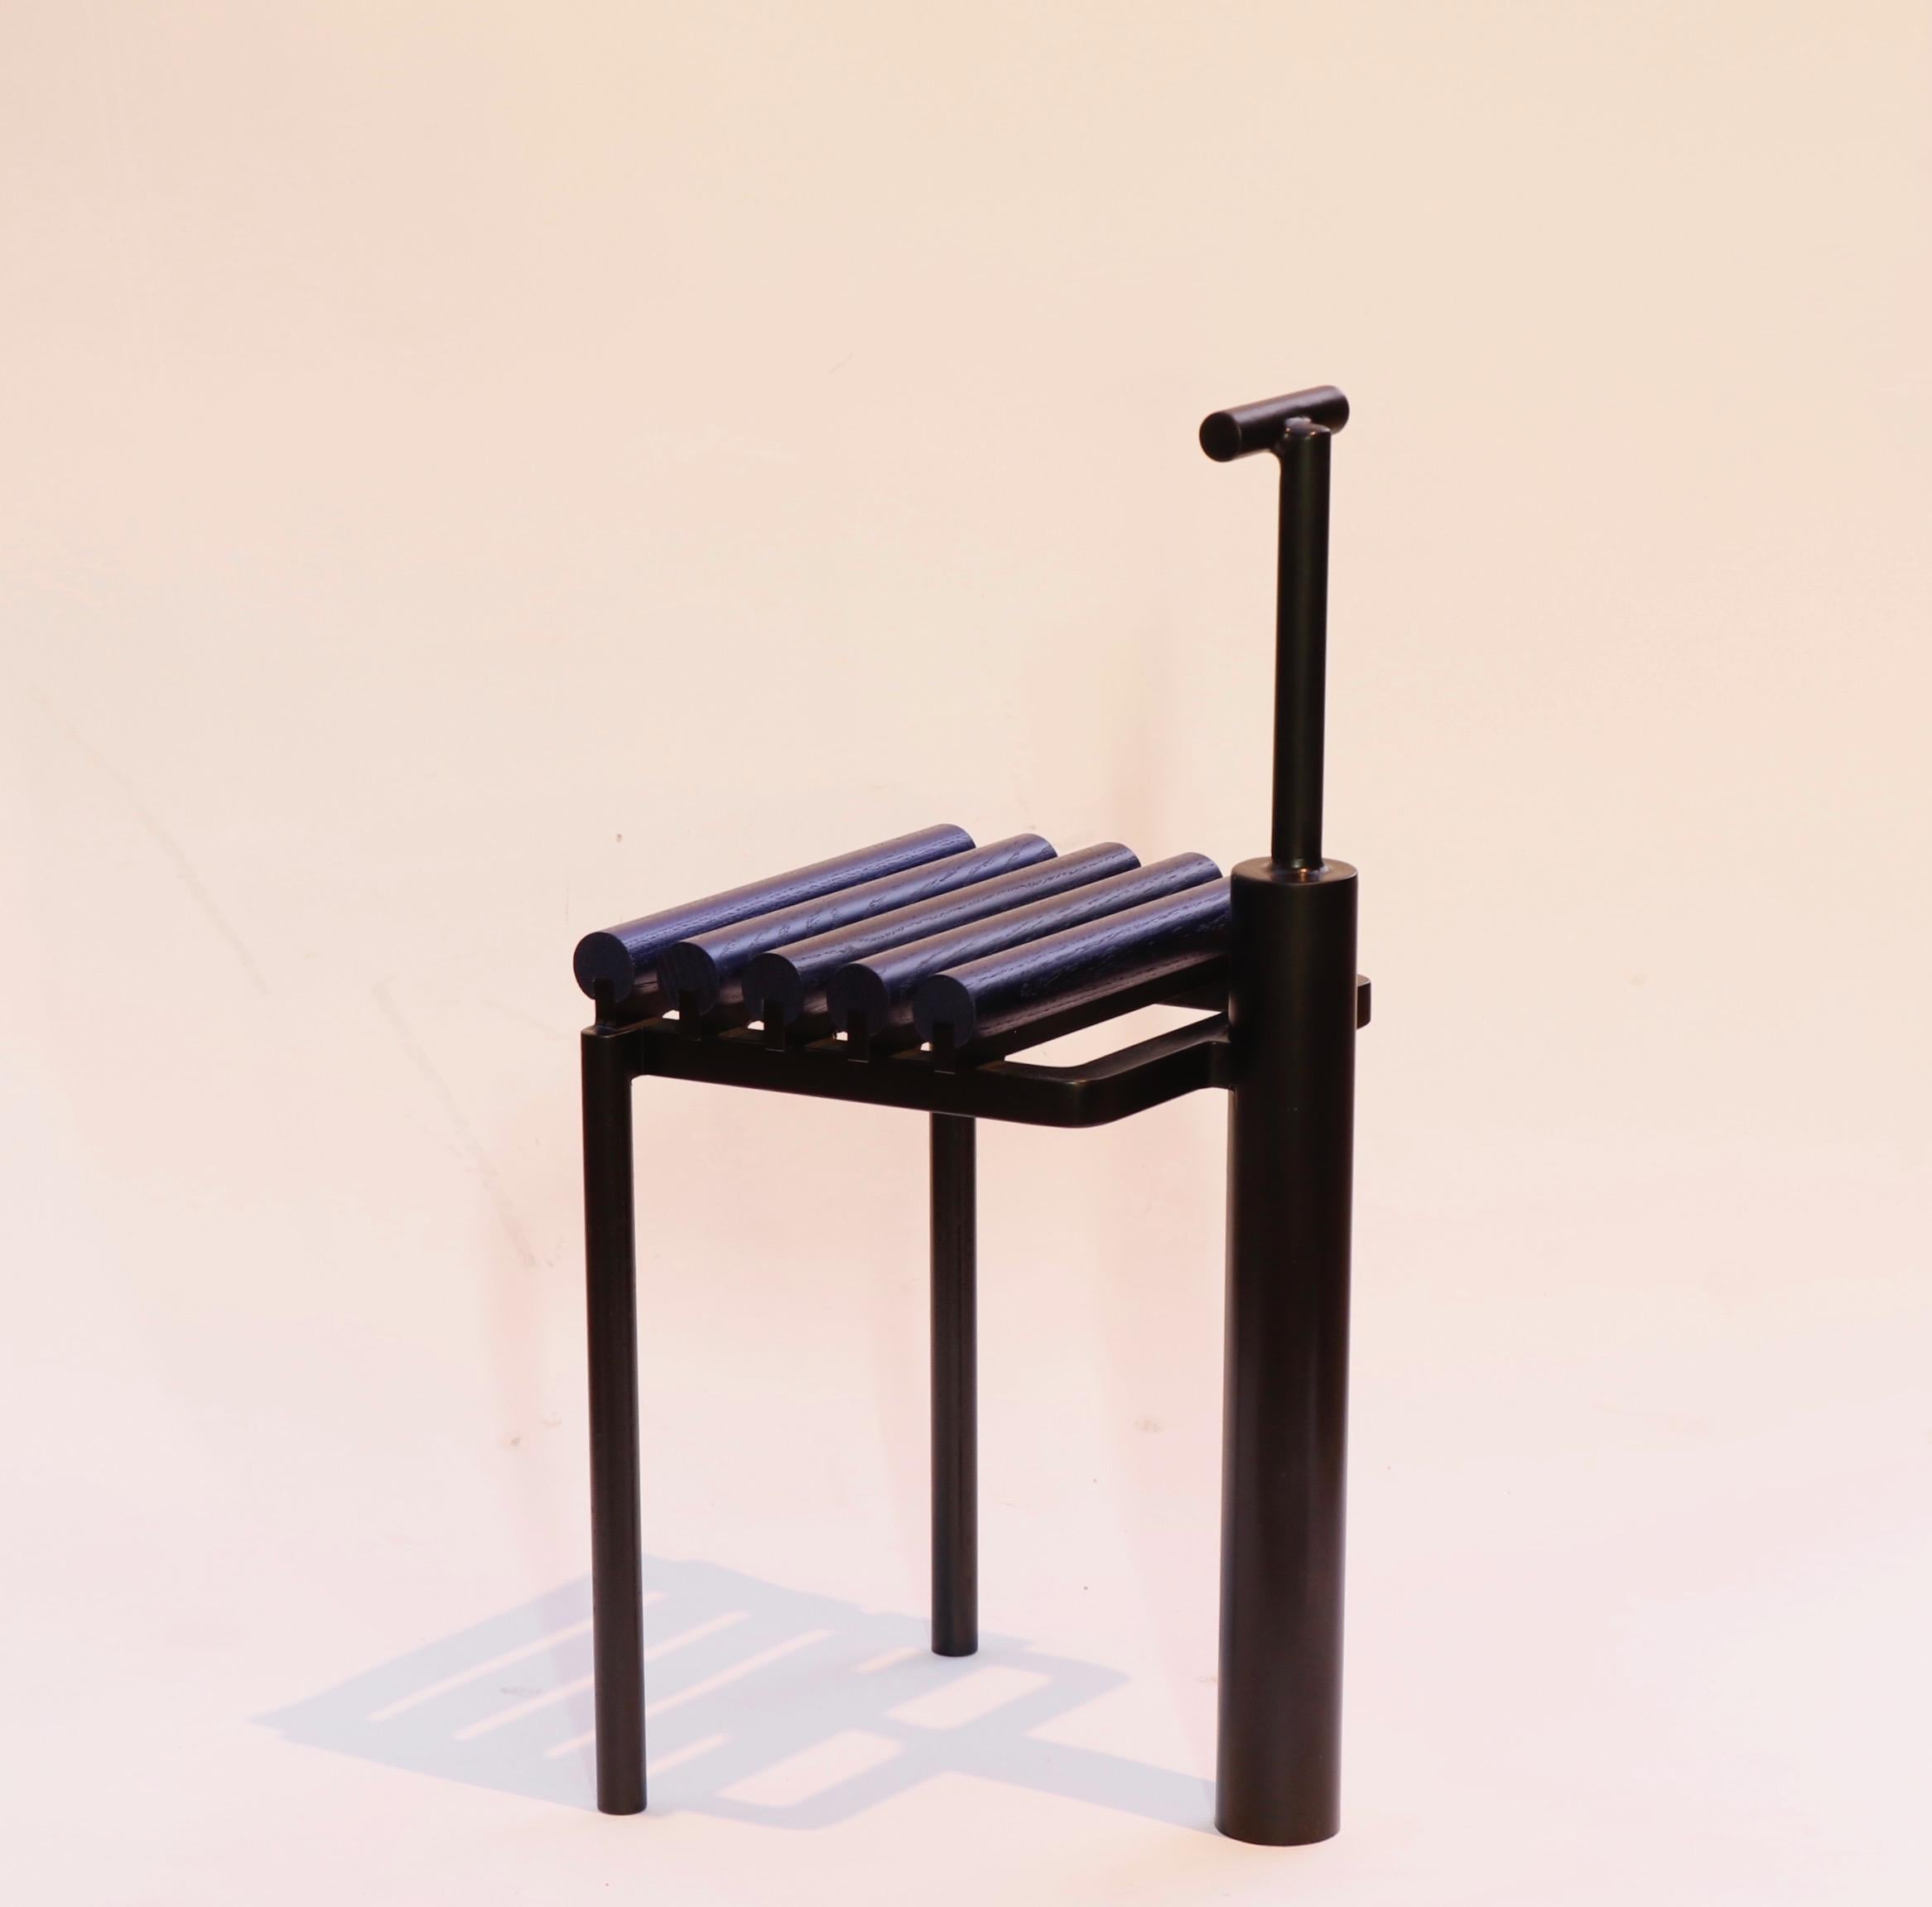 Chair 9, Sculptural Chair in Steel and Oak, Metallic Blue and Black Painted In New Condition For Sale In Baltimore, MD